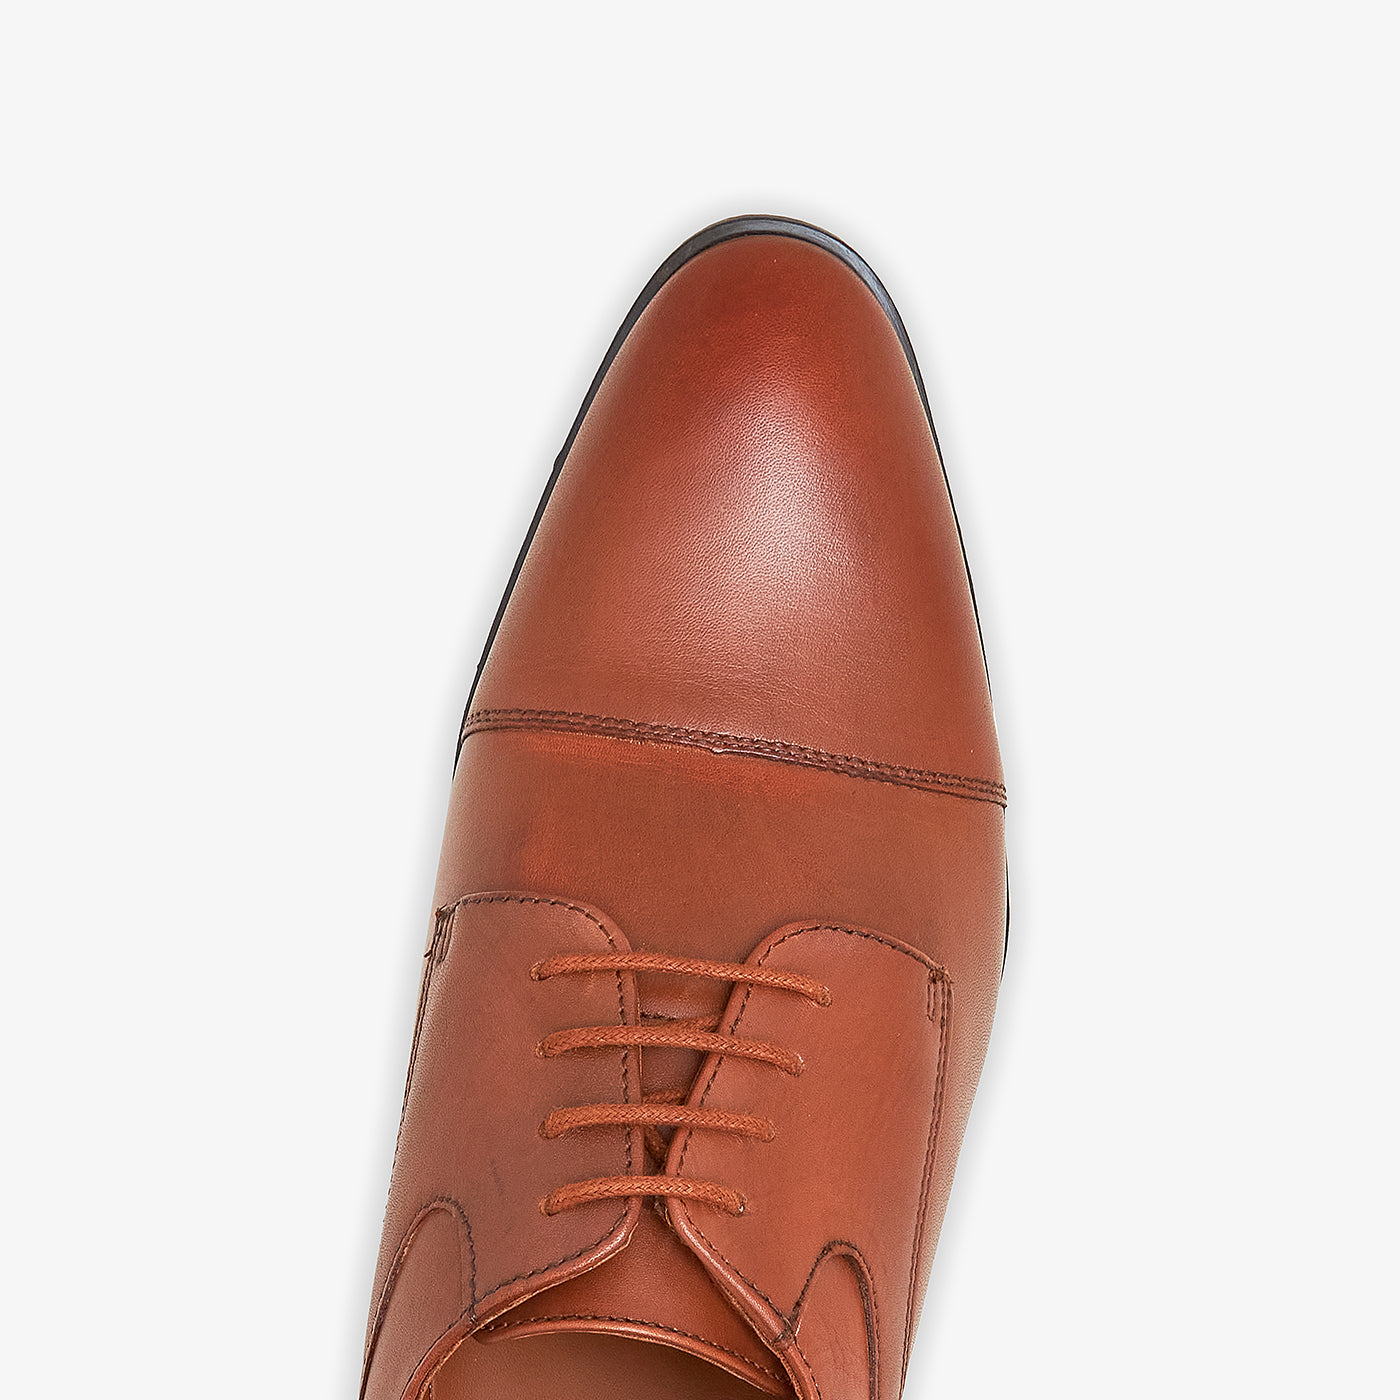 Men's Stitched Leather Oxford